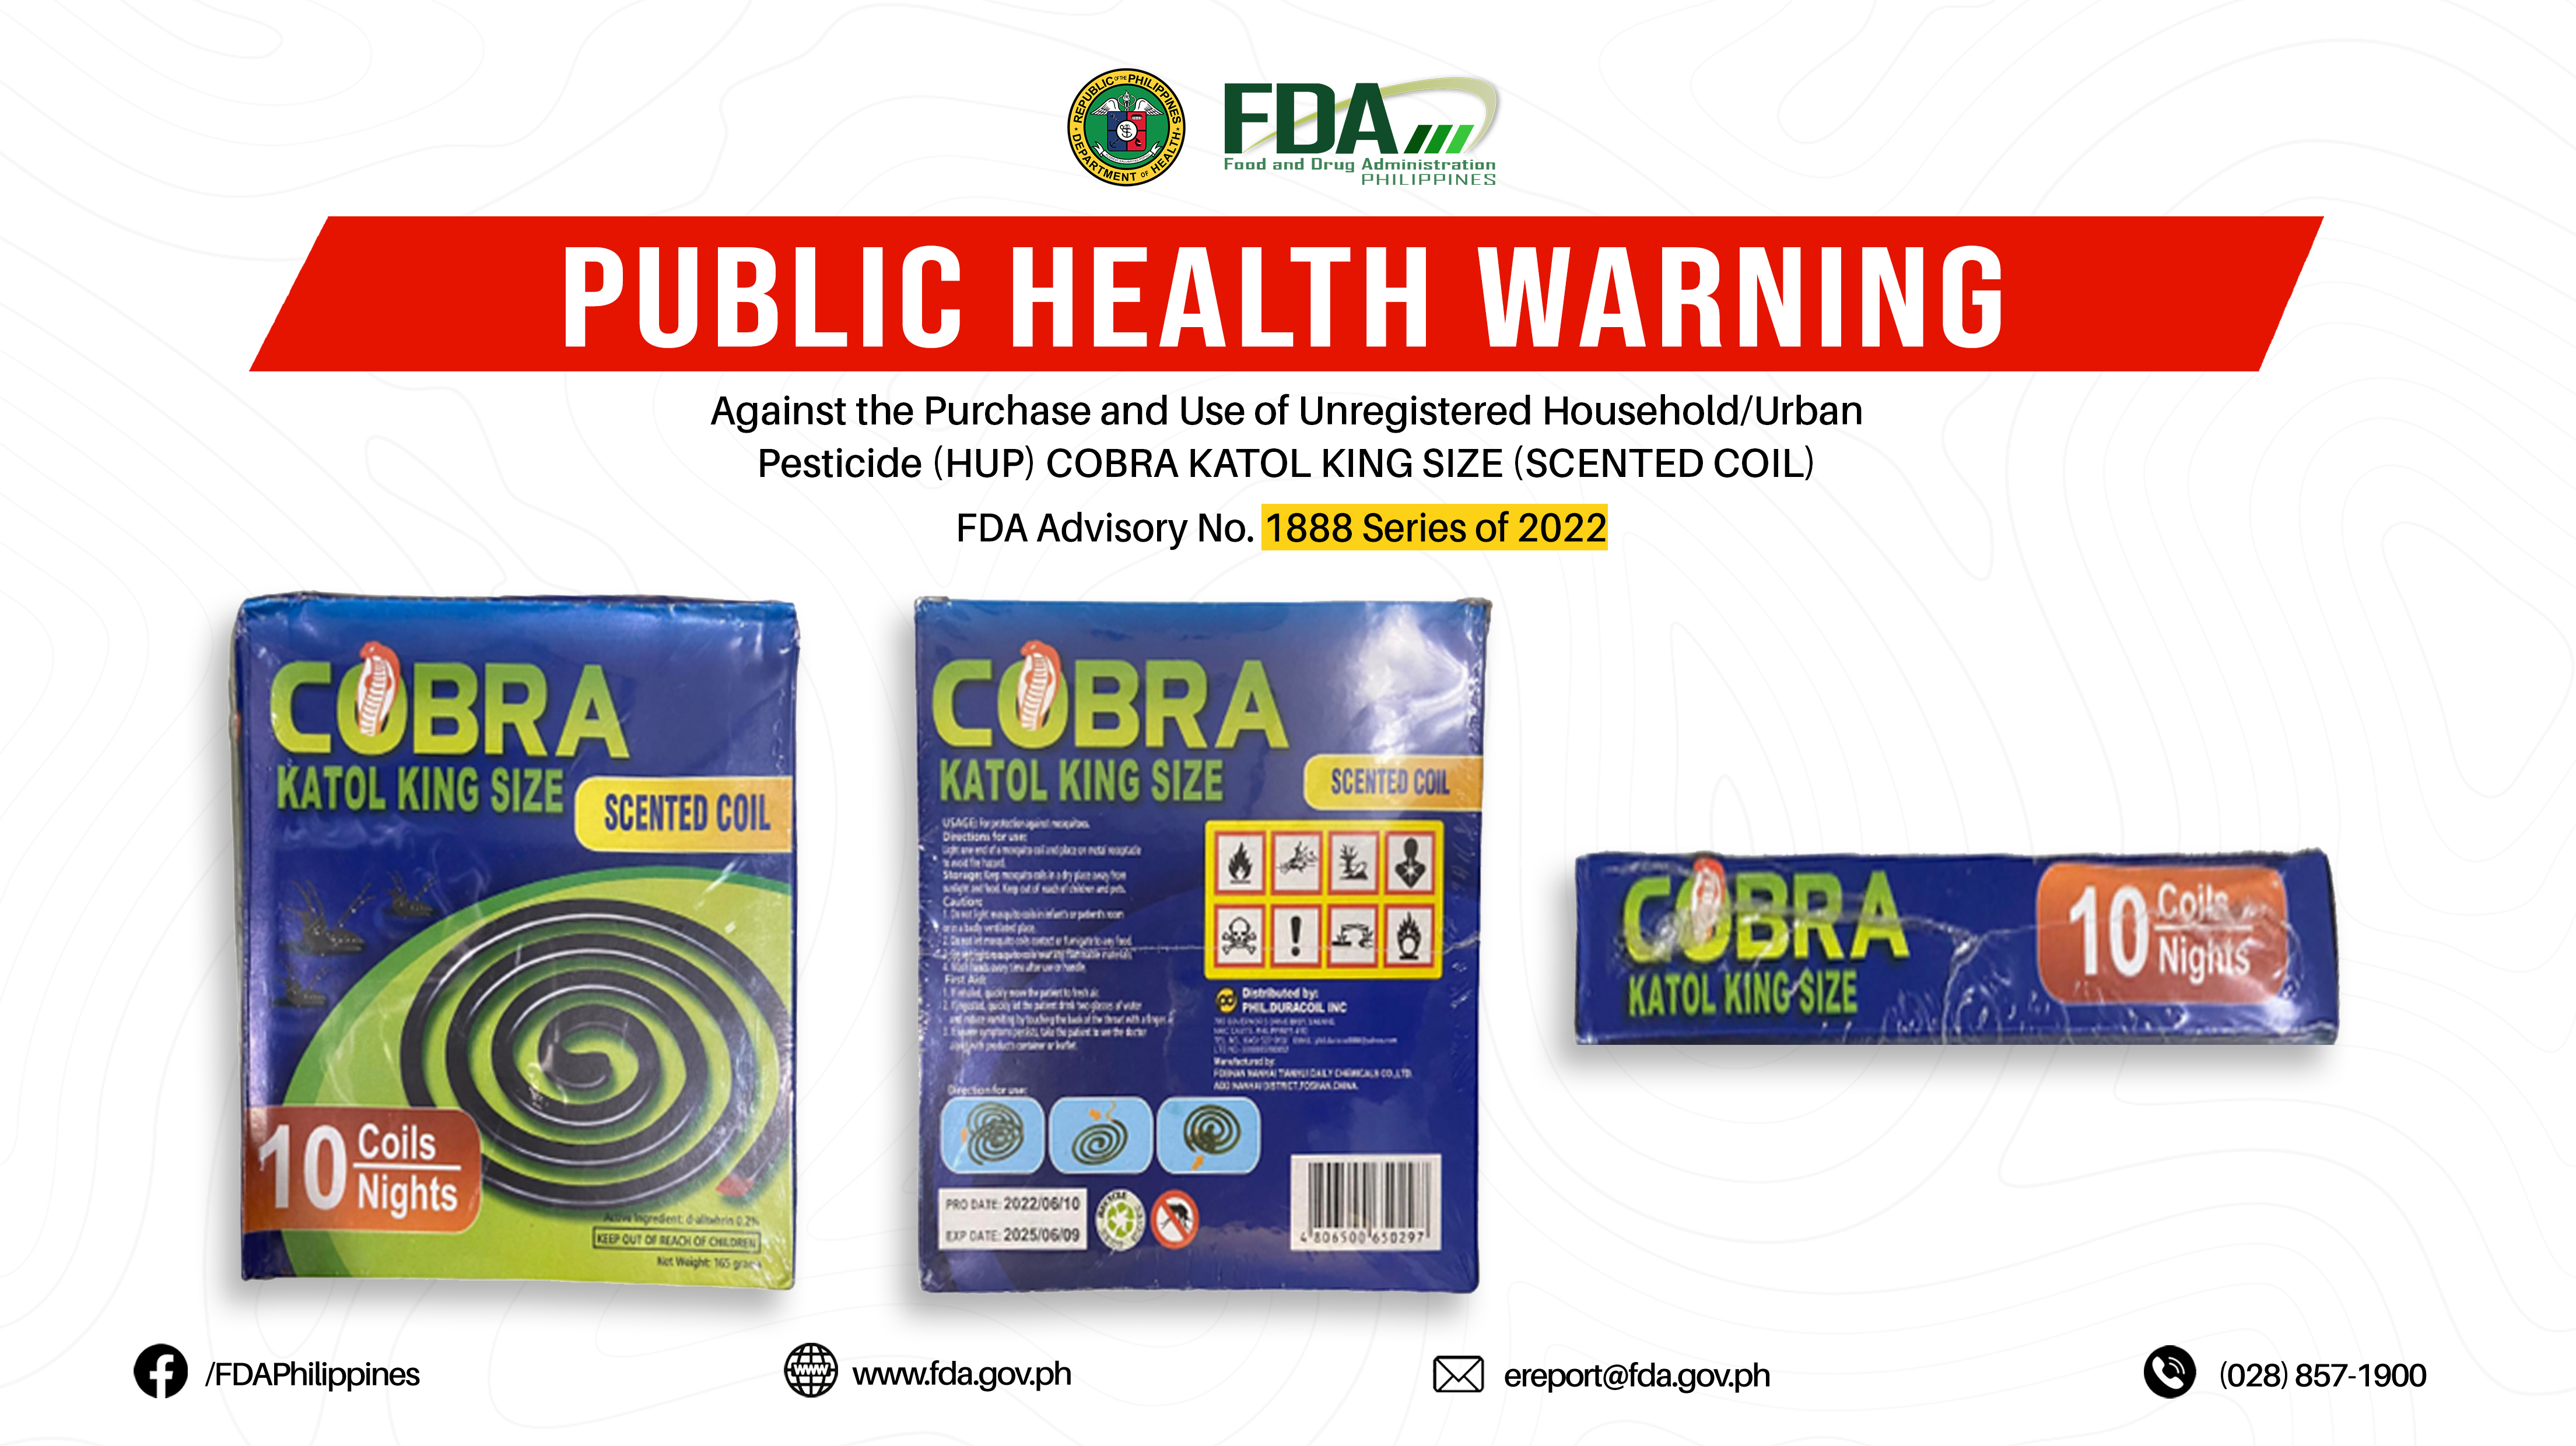 FDA Advisory No.2022-1888 || Public Health Warning Against the Purchase and Use of Unregistered Household/Urban Pesticide (HUP) COBRA KATOL KING SIZE (SCENTED COIL)